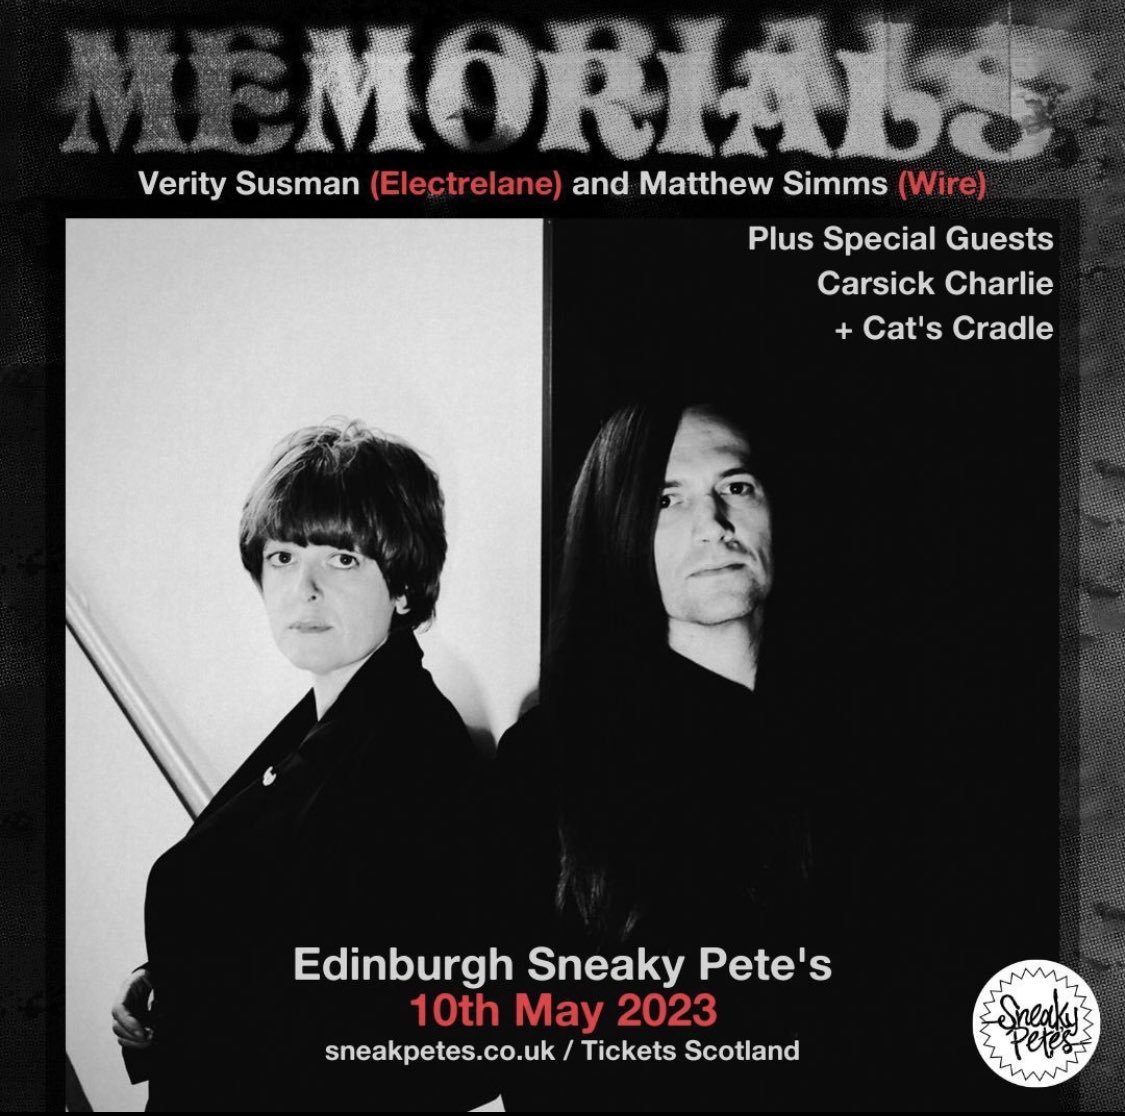 Our first UK tour kicks off next week! Gig #1 is in EDINBURGH on Wednesday 10th May at @sneakypetesclub with support from @carsickcharIie and @catscradleband Tickets here: bnds.us/ycdhi1 All dates on the tour are £10 or less.